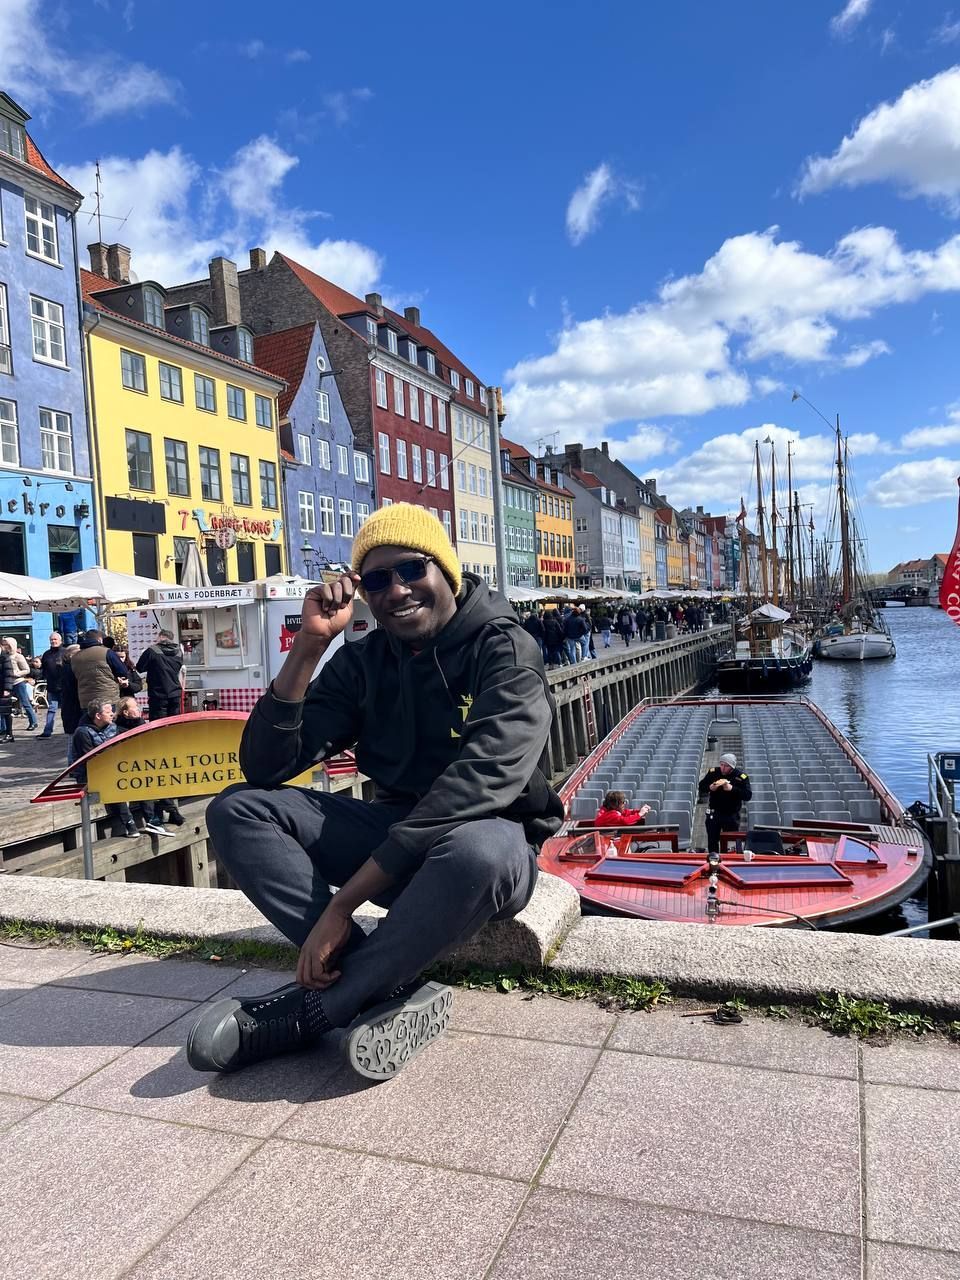 Elvis Lubanga on LinkedIn: I visited Nyhavn, a waterfront canal and ...